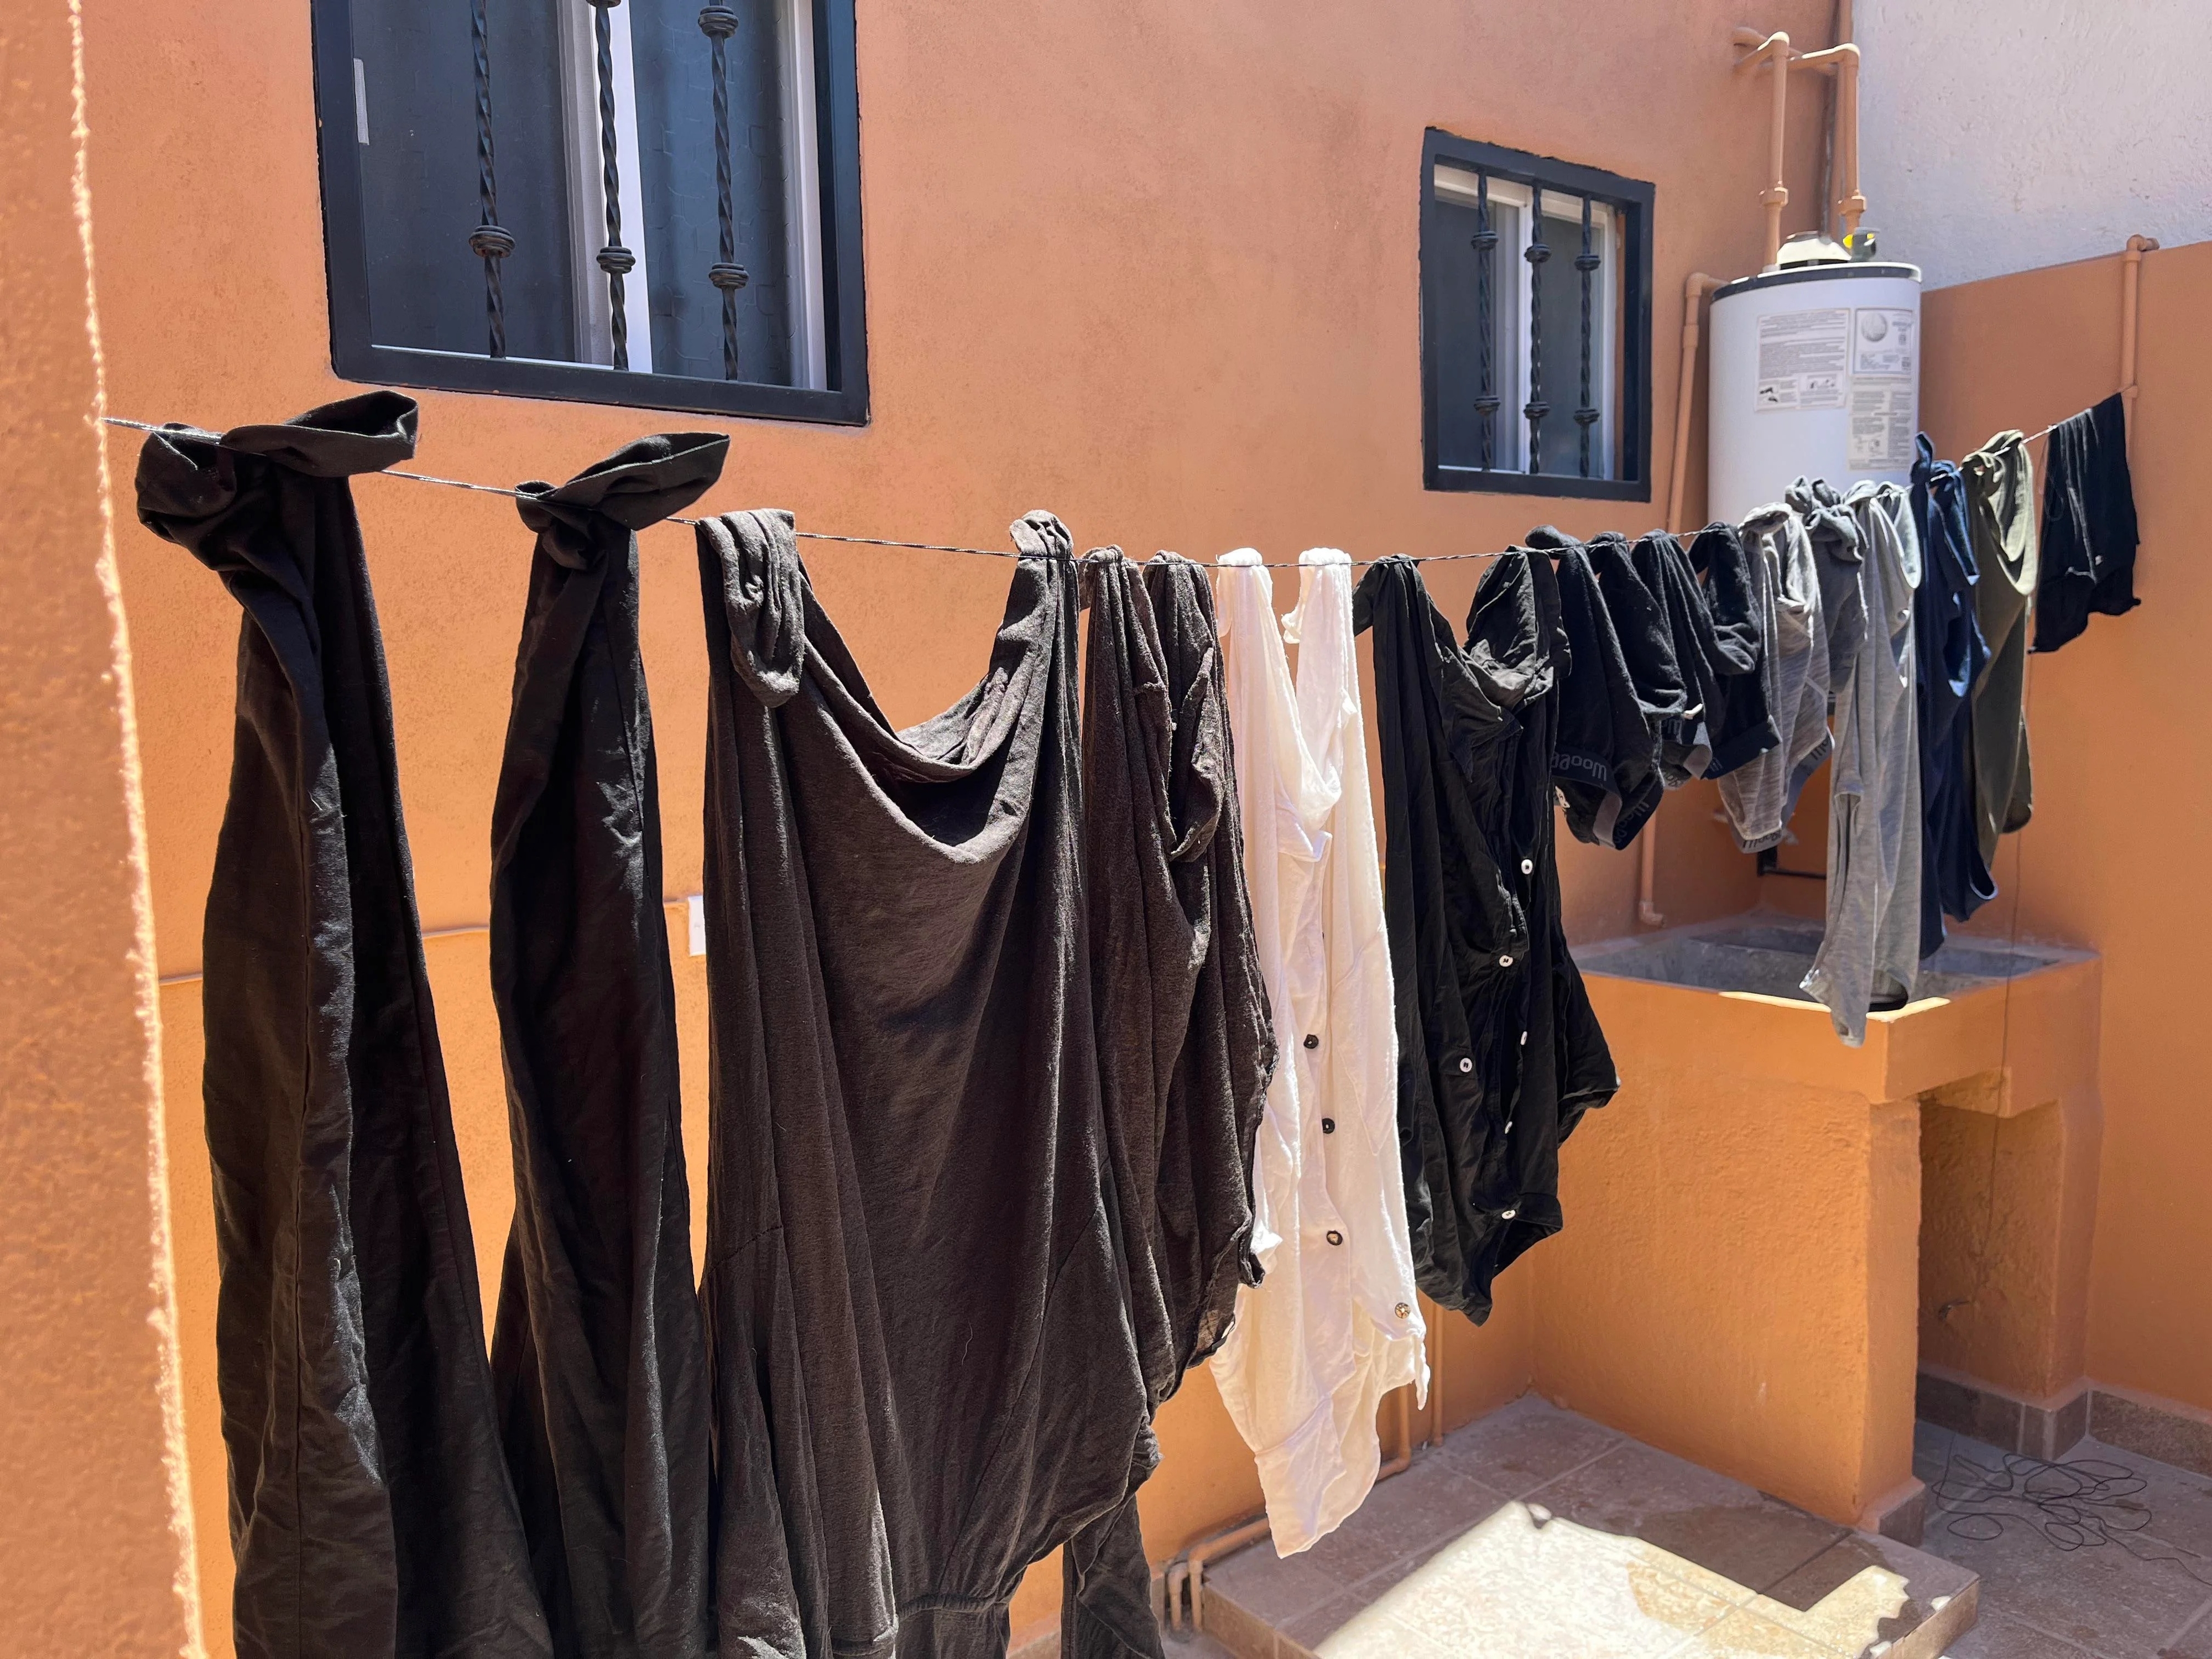 Clothing hanging outside on a clothesline